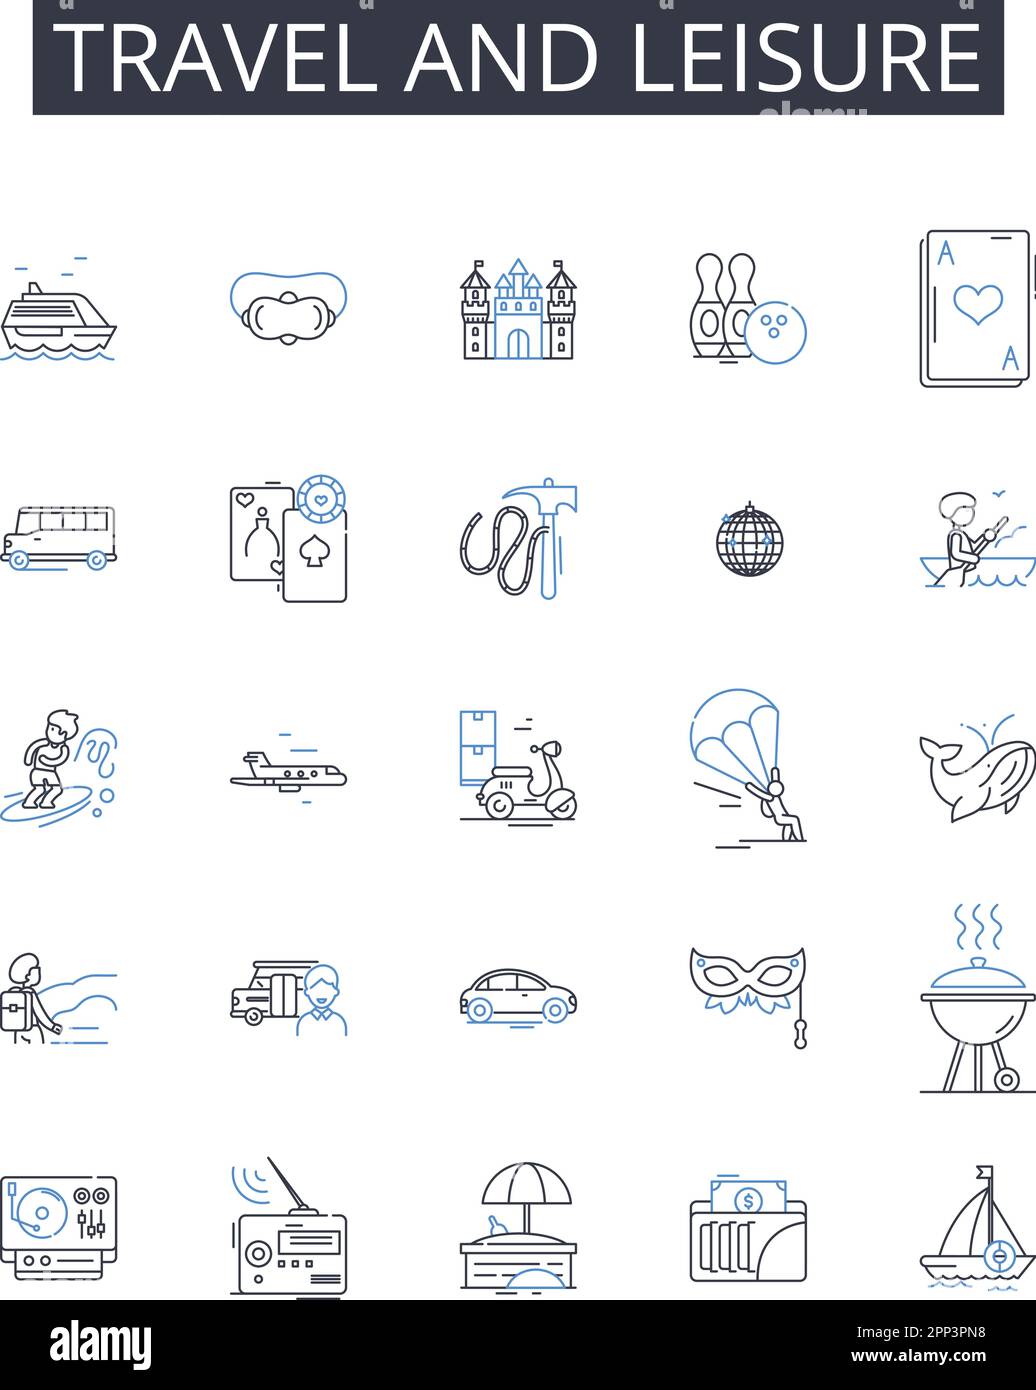 Travel and leisure line icons collection. Connectivity, Fibre, Bandwidth, Spectrum, Broadband, Nerk, Mobile vector and linear illustration. Satellite Stock Vector